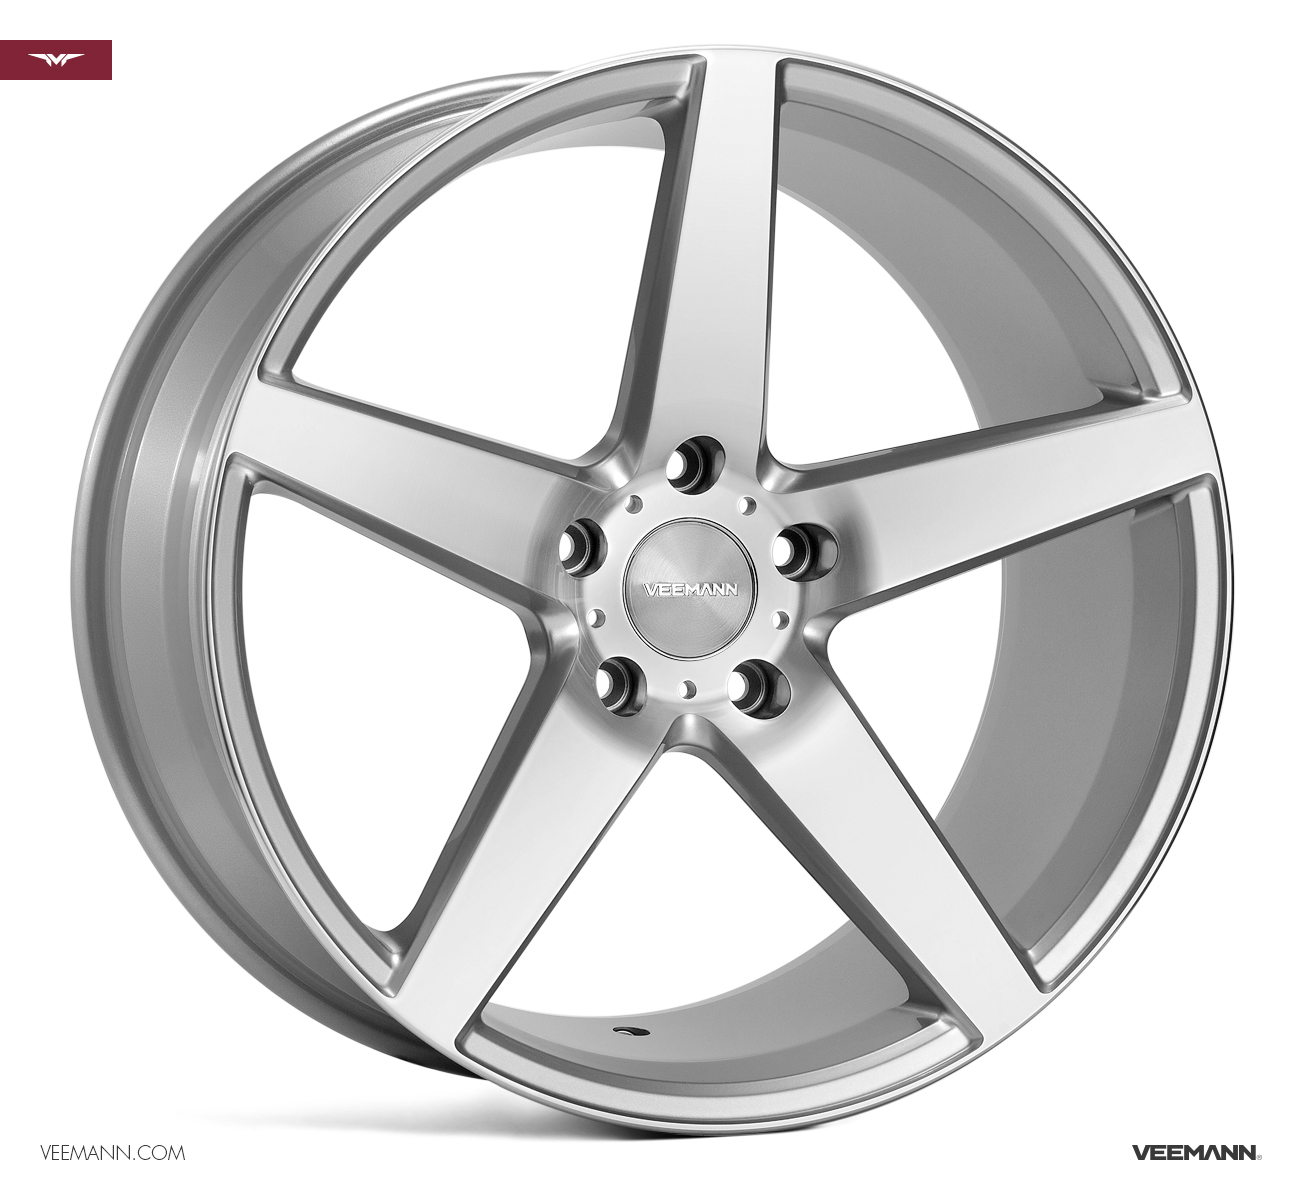 NEW 20  VEEMANN V FS8 5 SPOKE CONCAVE ALLOY WHEELS IN SILVER WITH POLISHED FACE  WIDER 10  REARS et38 42